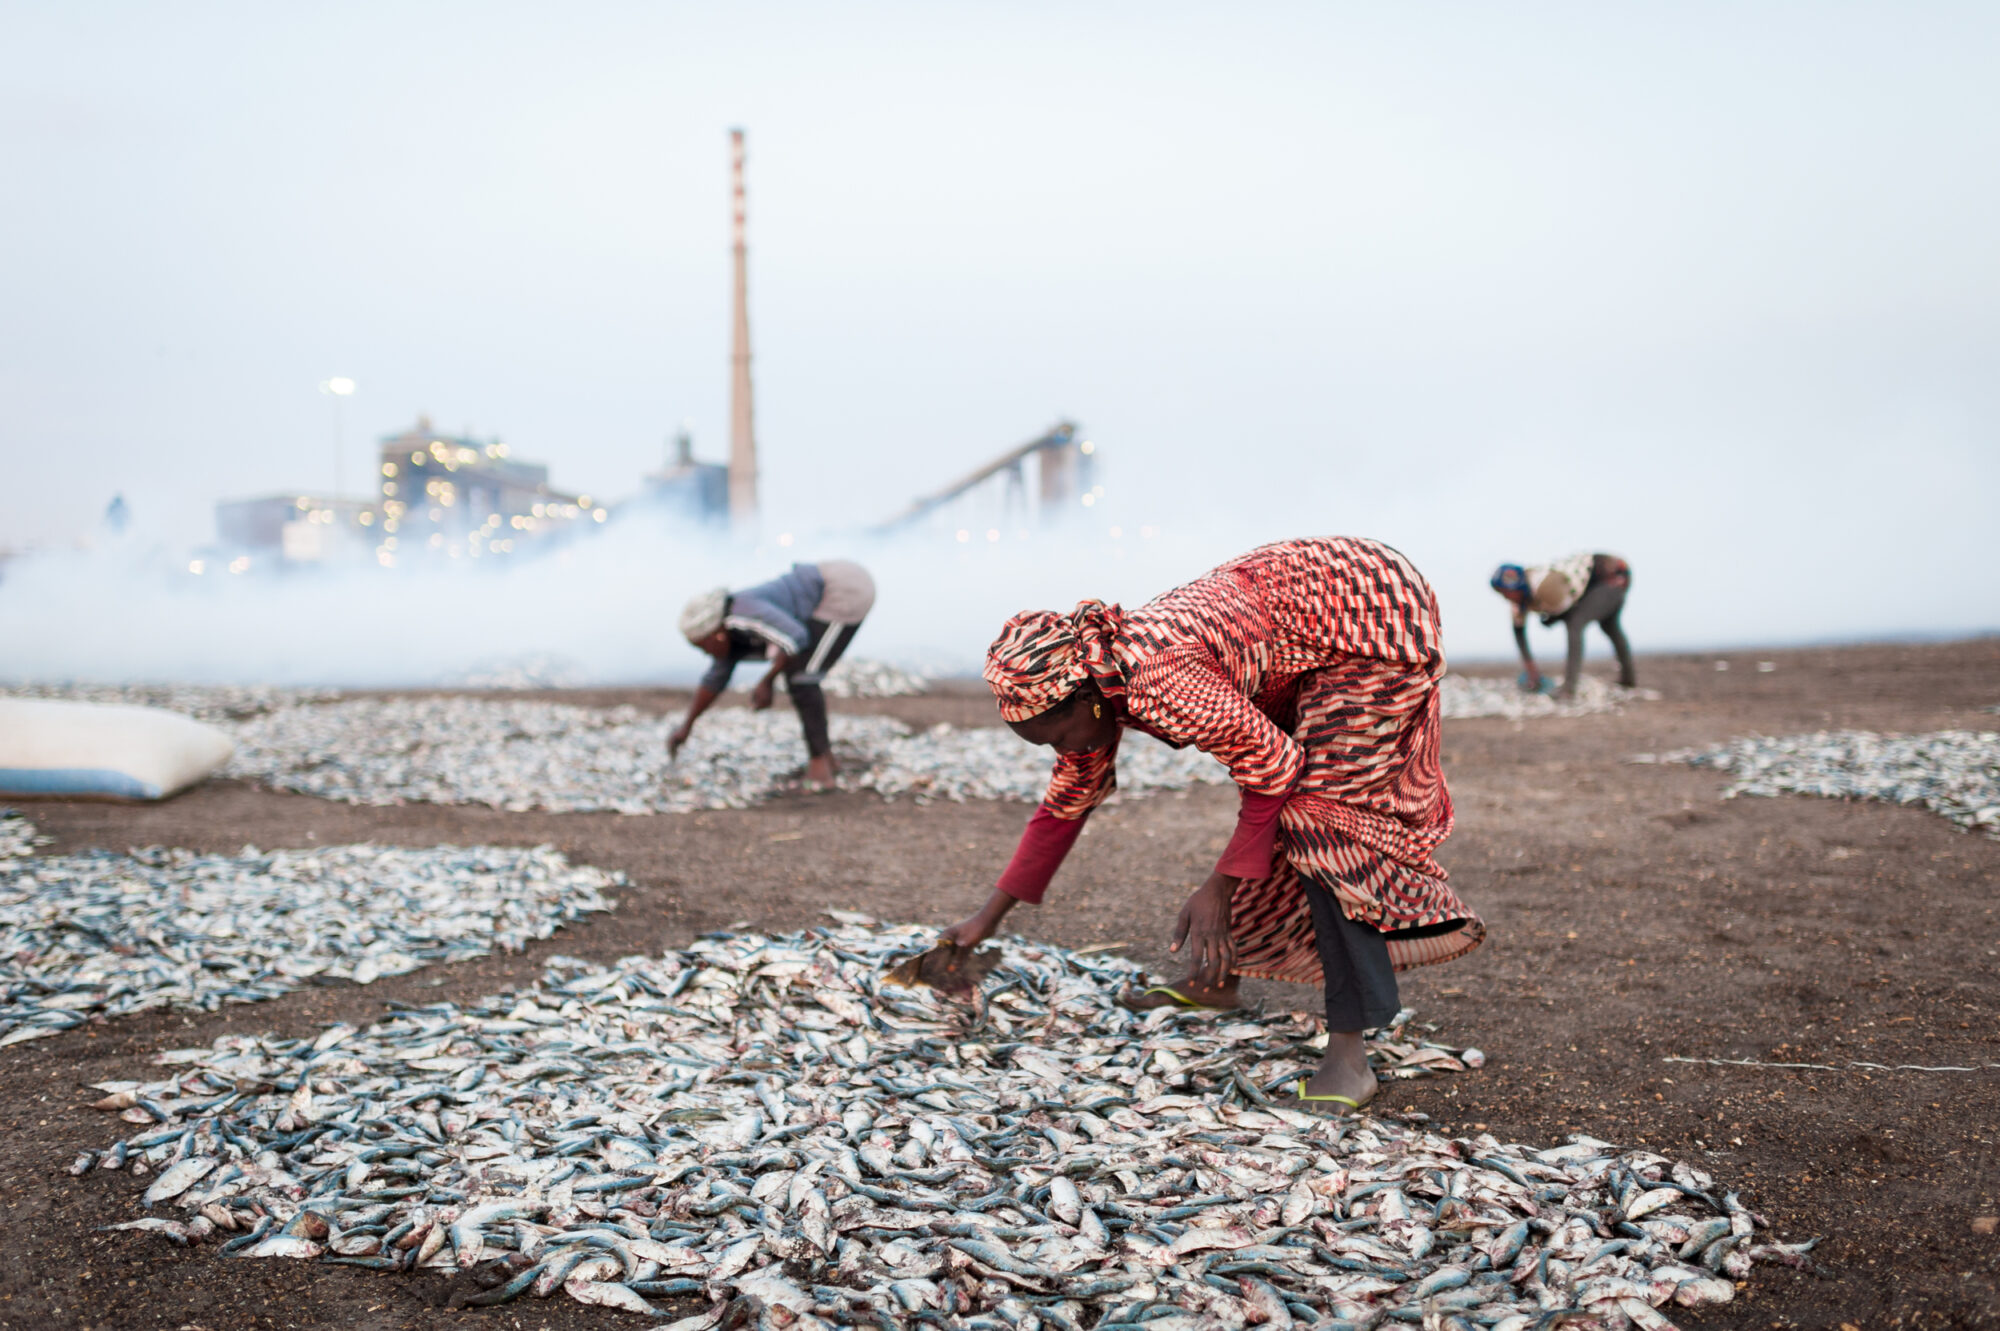 Two Black women sort through large piles of fish lying on the ground. Industrial buildings are visible in the background.